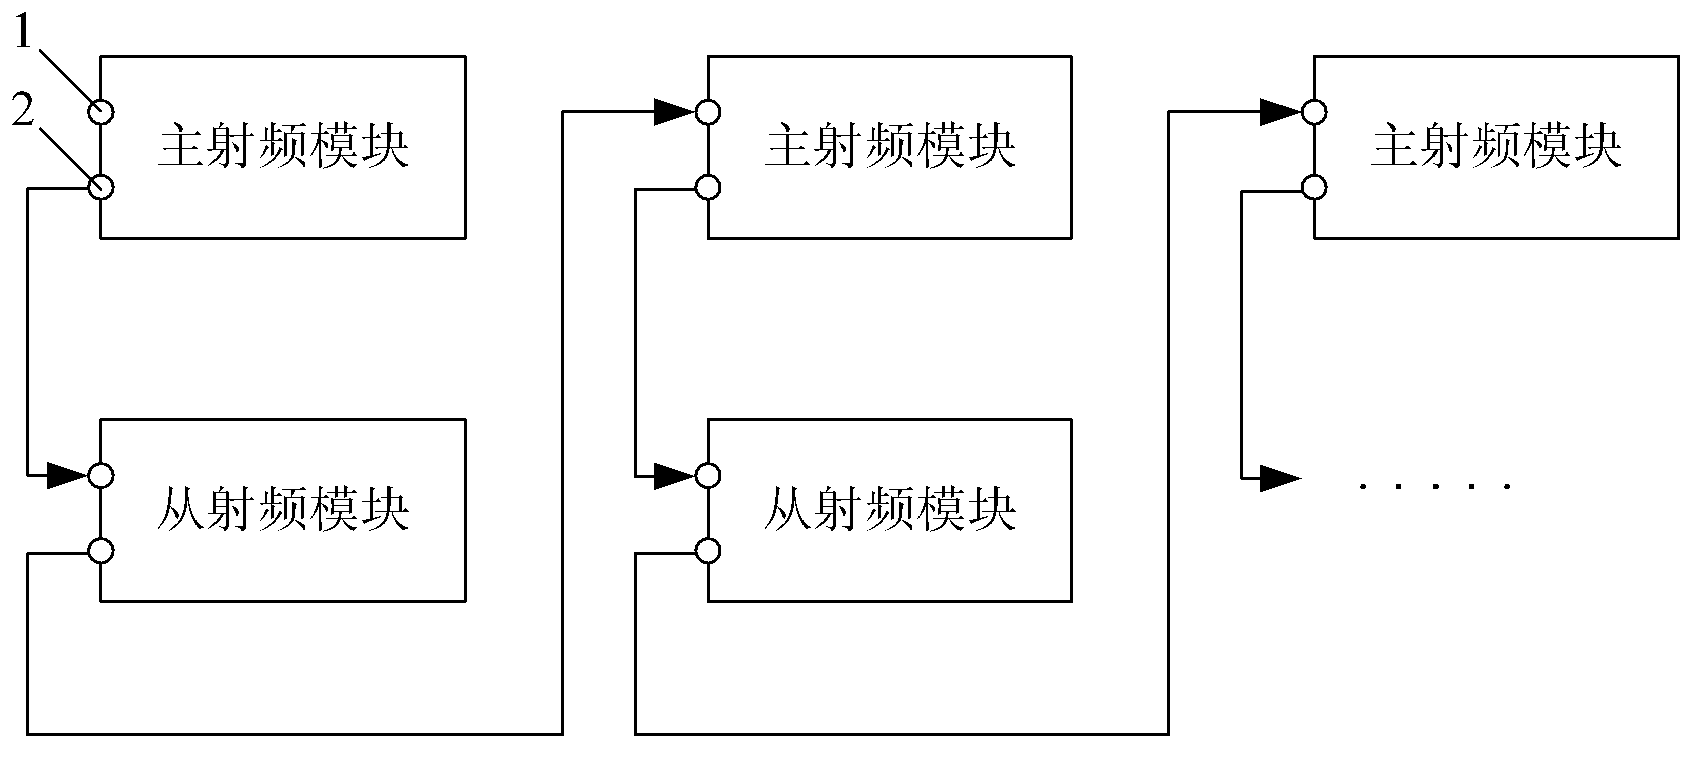 Multi-radio system and radio frequency module